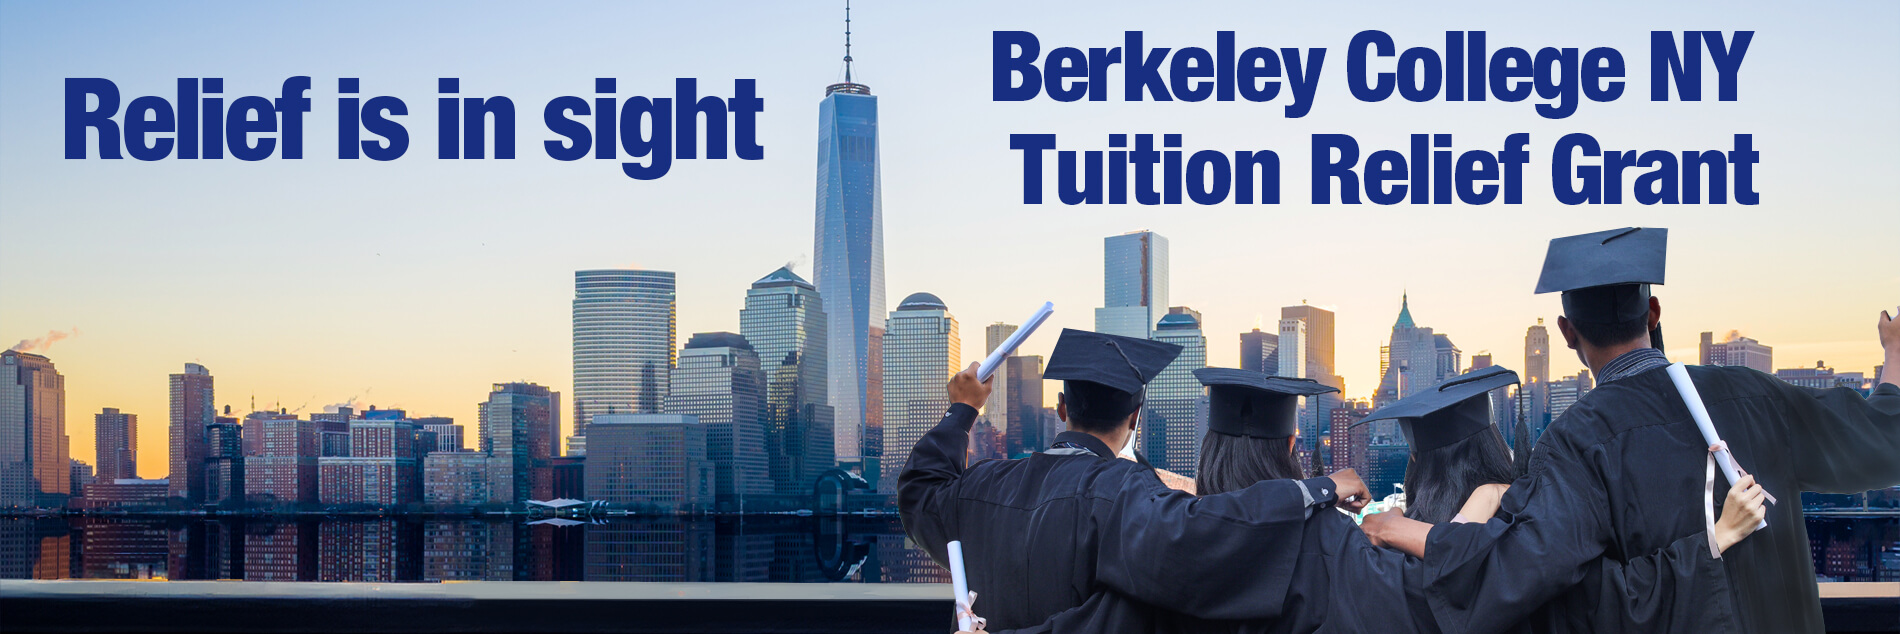 Relief is Insight. Berkeley College New York Tuition Relief Grant. Image of Graduates against city skyline backdrop